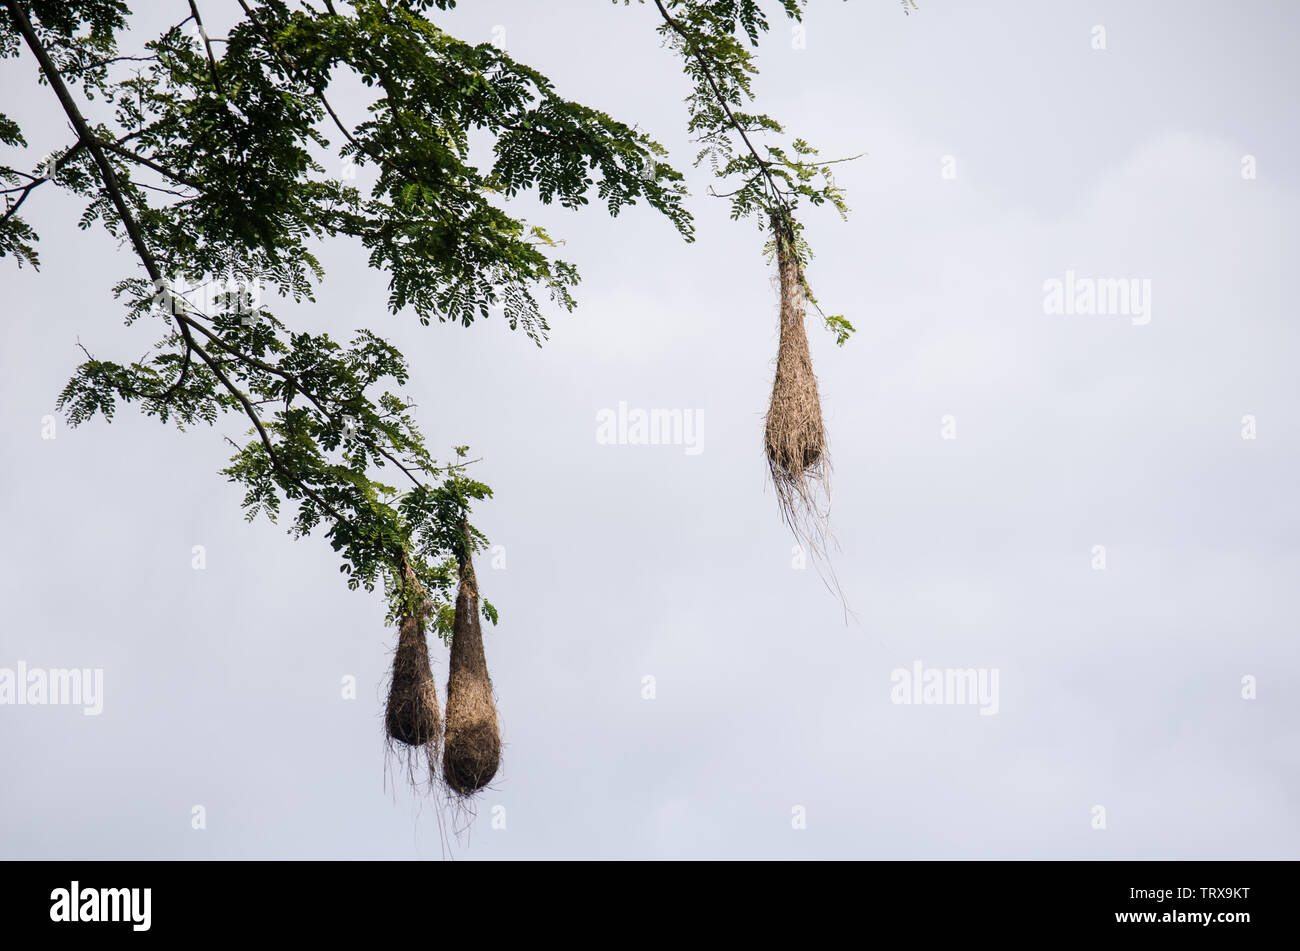 The oropendolas live in colonies and built their sack-shaped nests in tall trees. Stock Photo